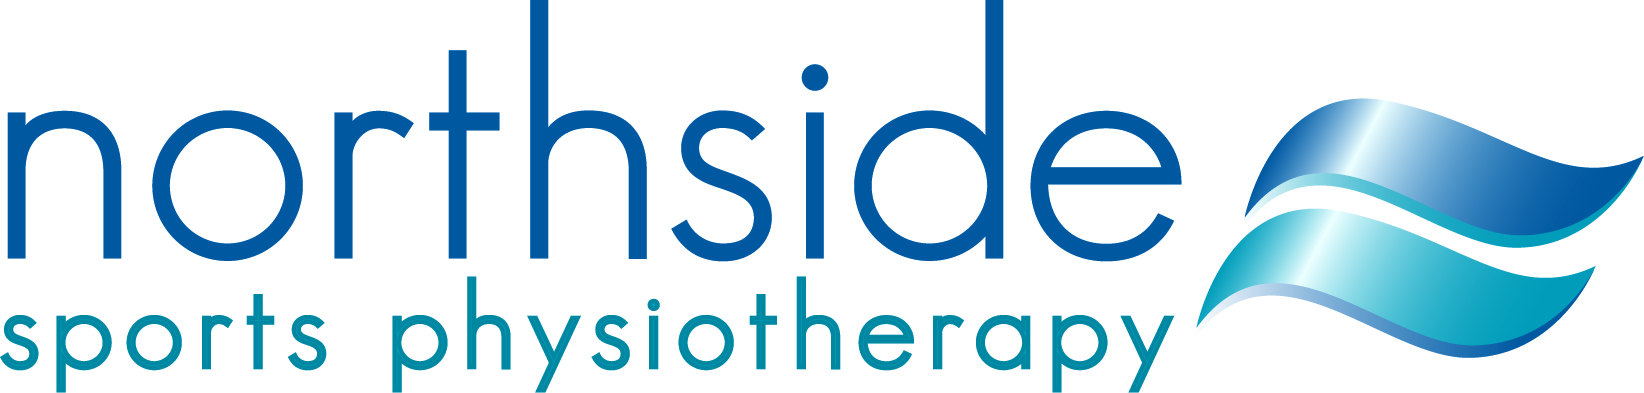 Northside Sports Physiotherapy